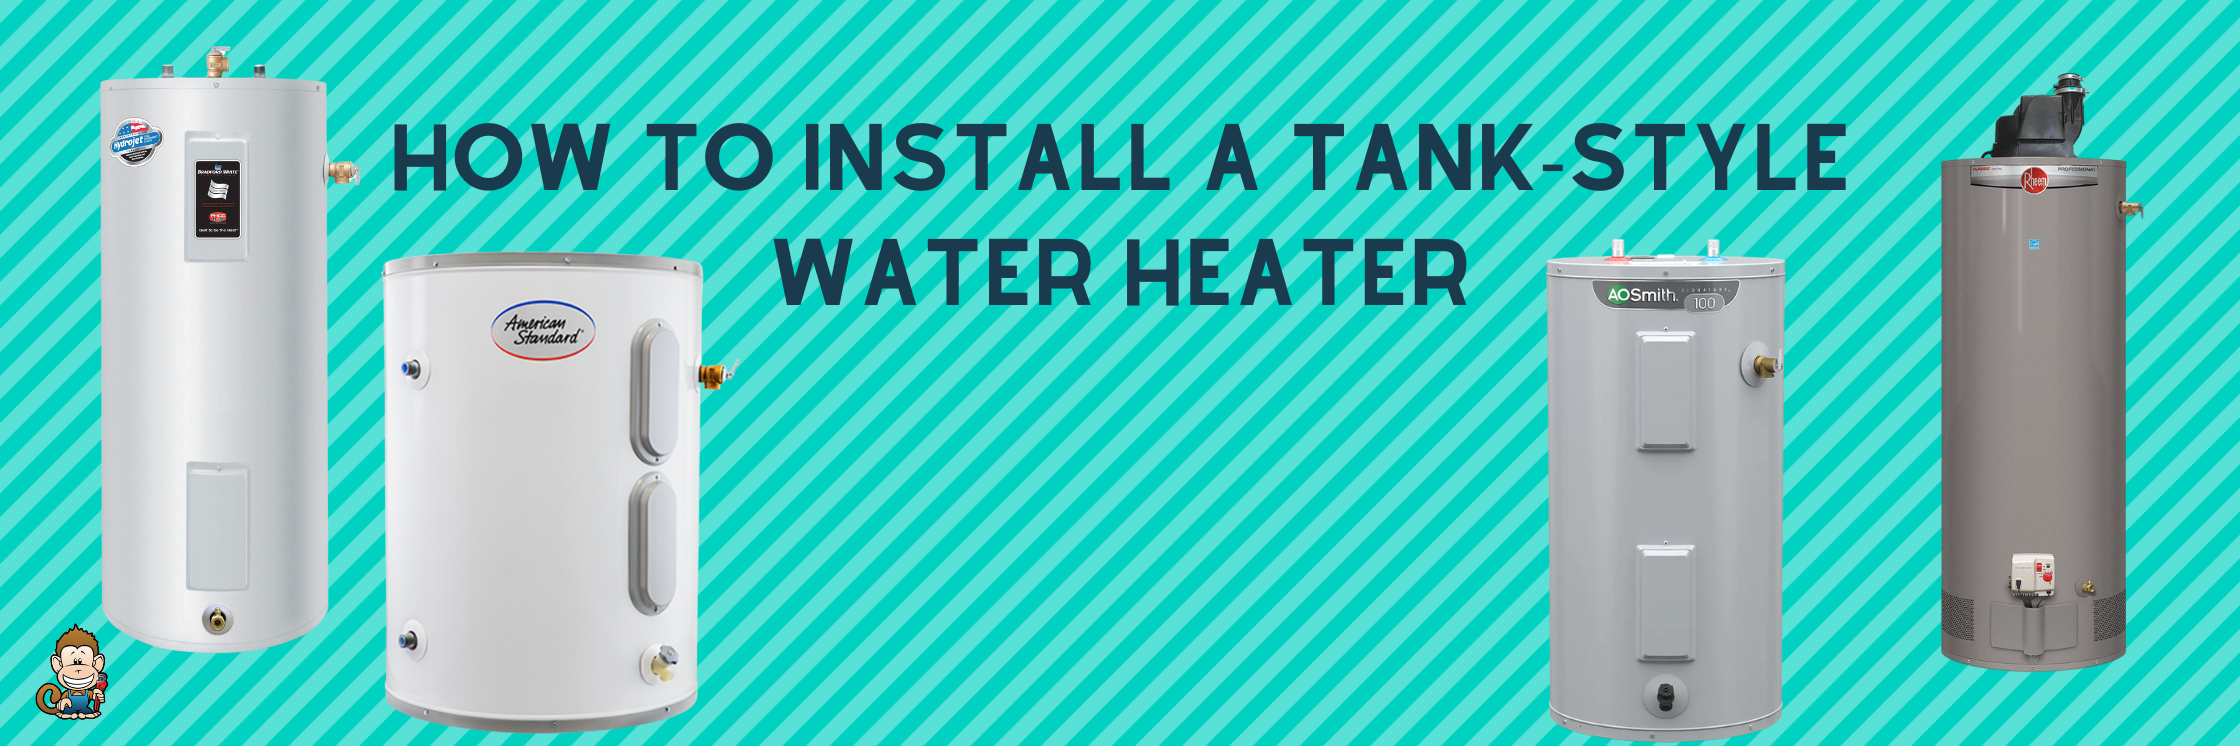 How to Install a Tank-Style Water Heater